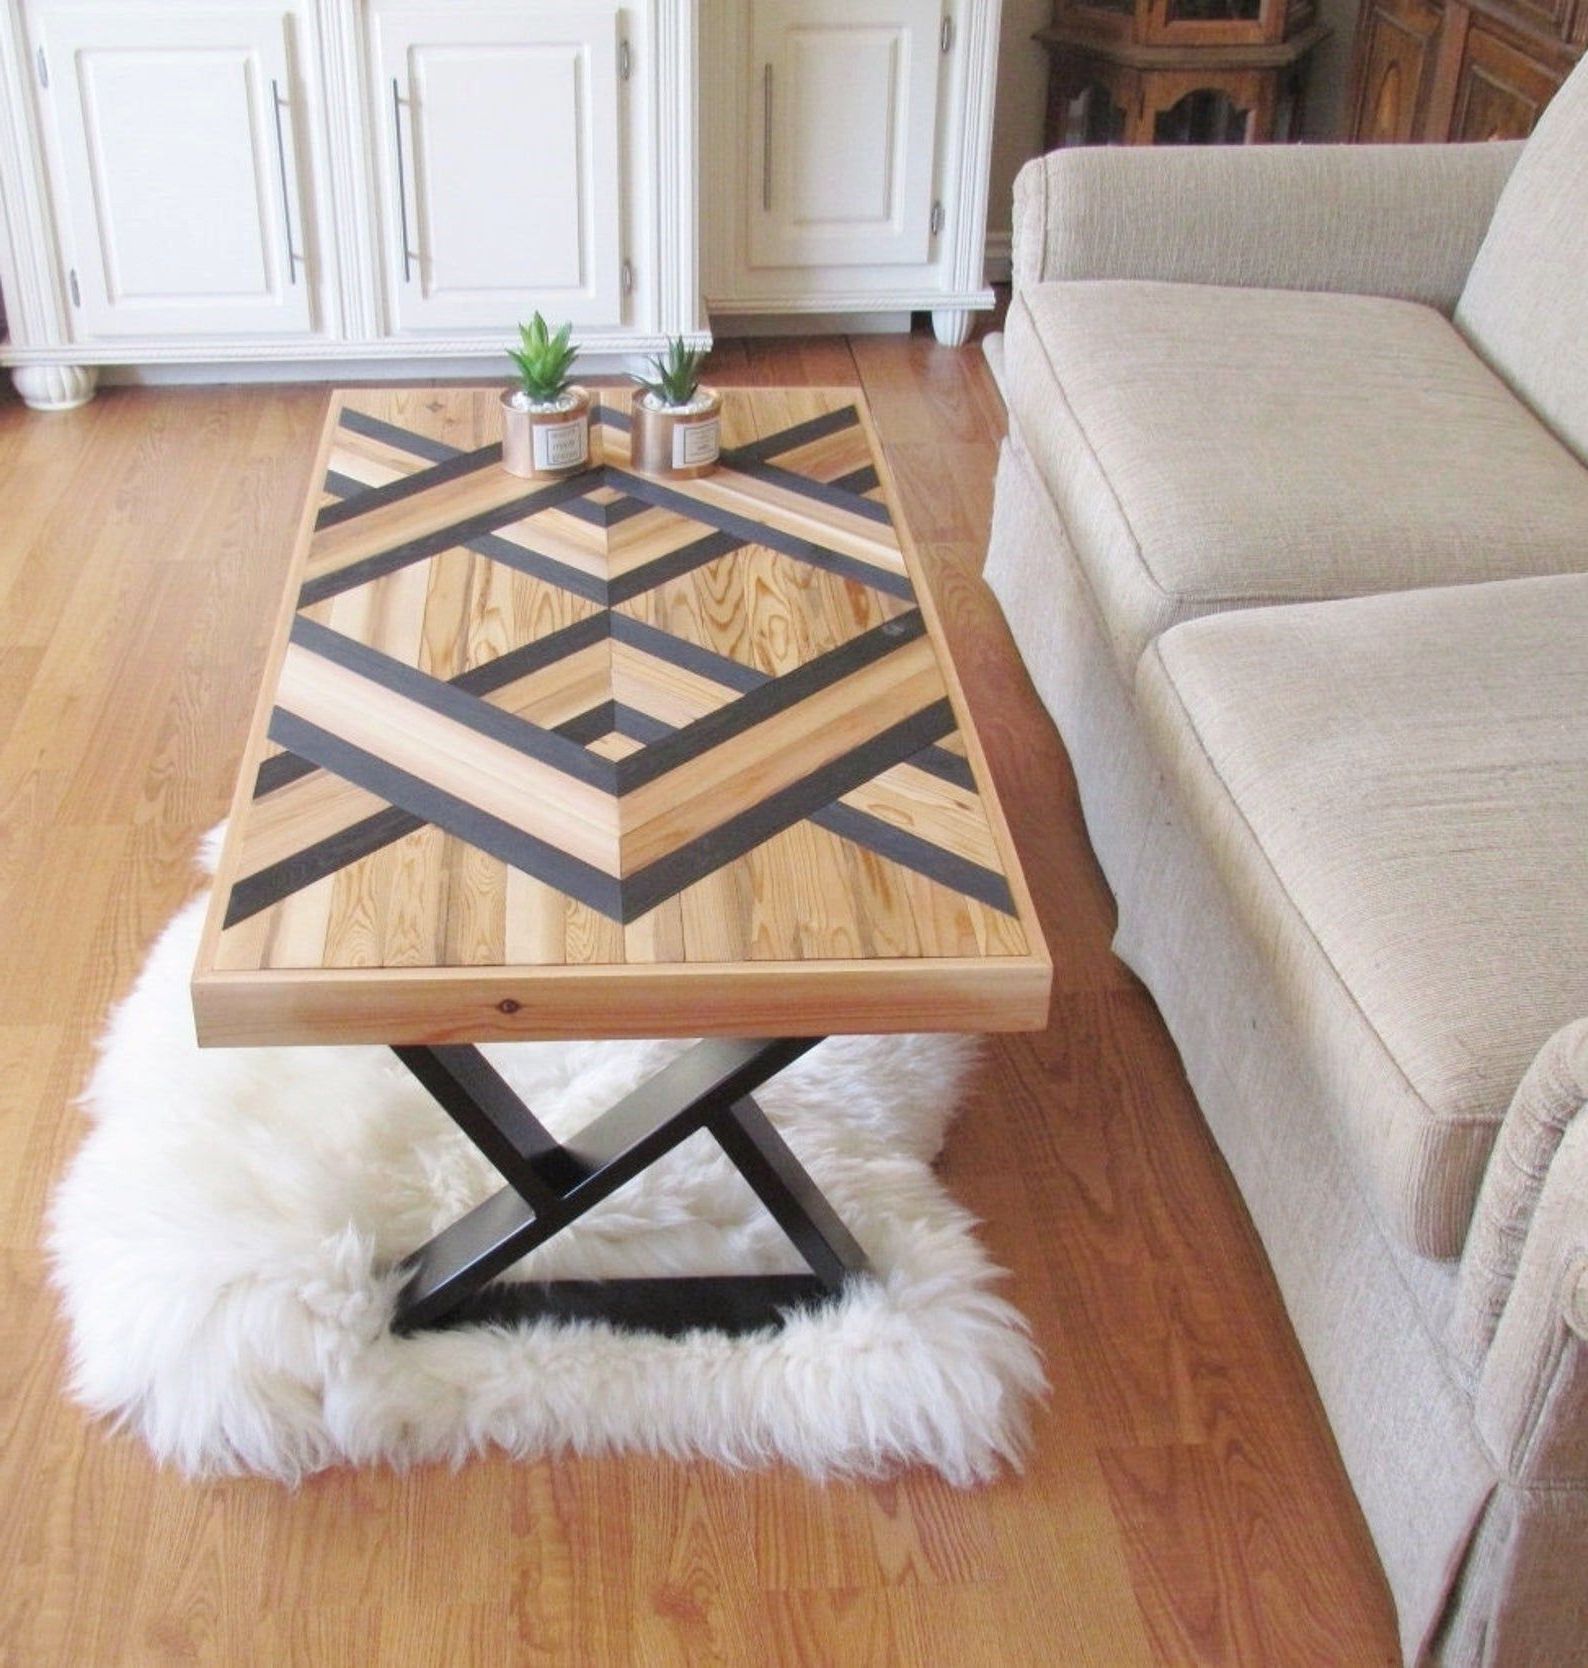 Most Recent Geometric Coffee Tables Throughout Reclaimed Wood Coffee Table Wood Chevron Geometric Black (View 1 of 20)